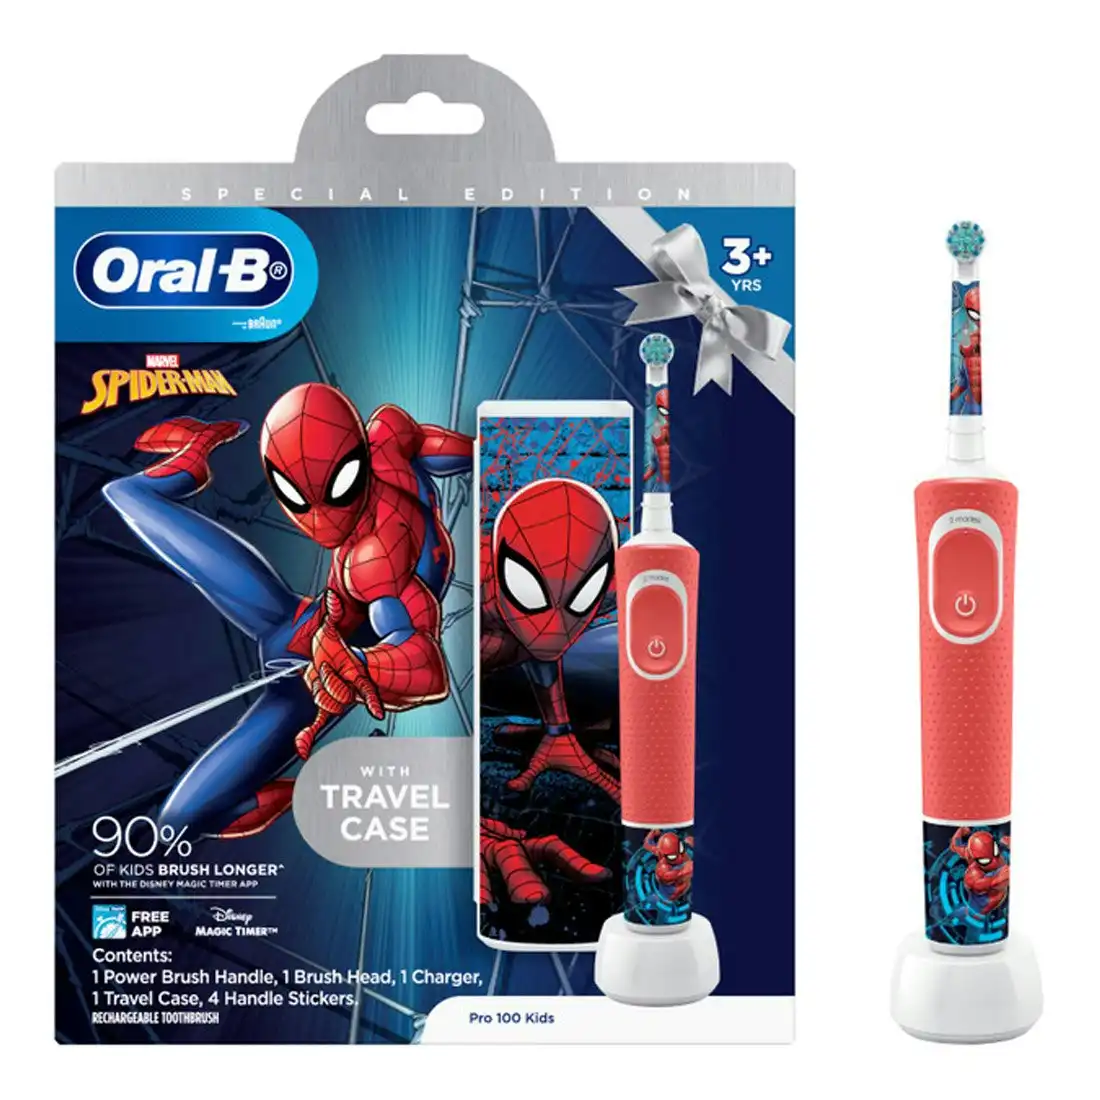 Oral-B Pro 100 Kids 3+Years Electric Toothbrush - Spiderman